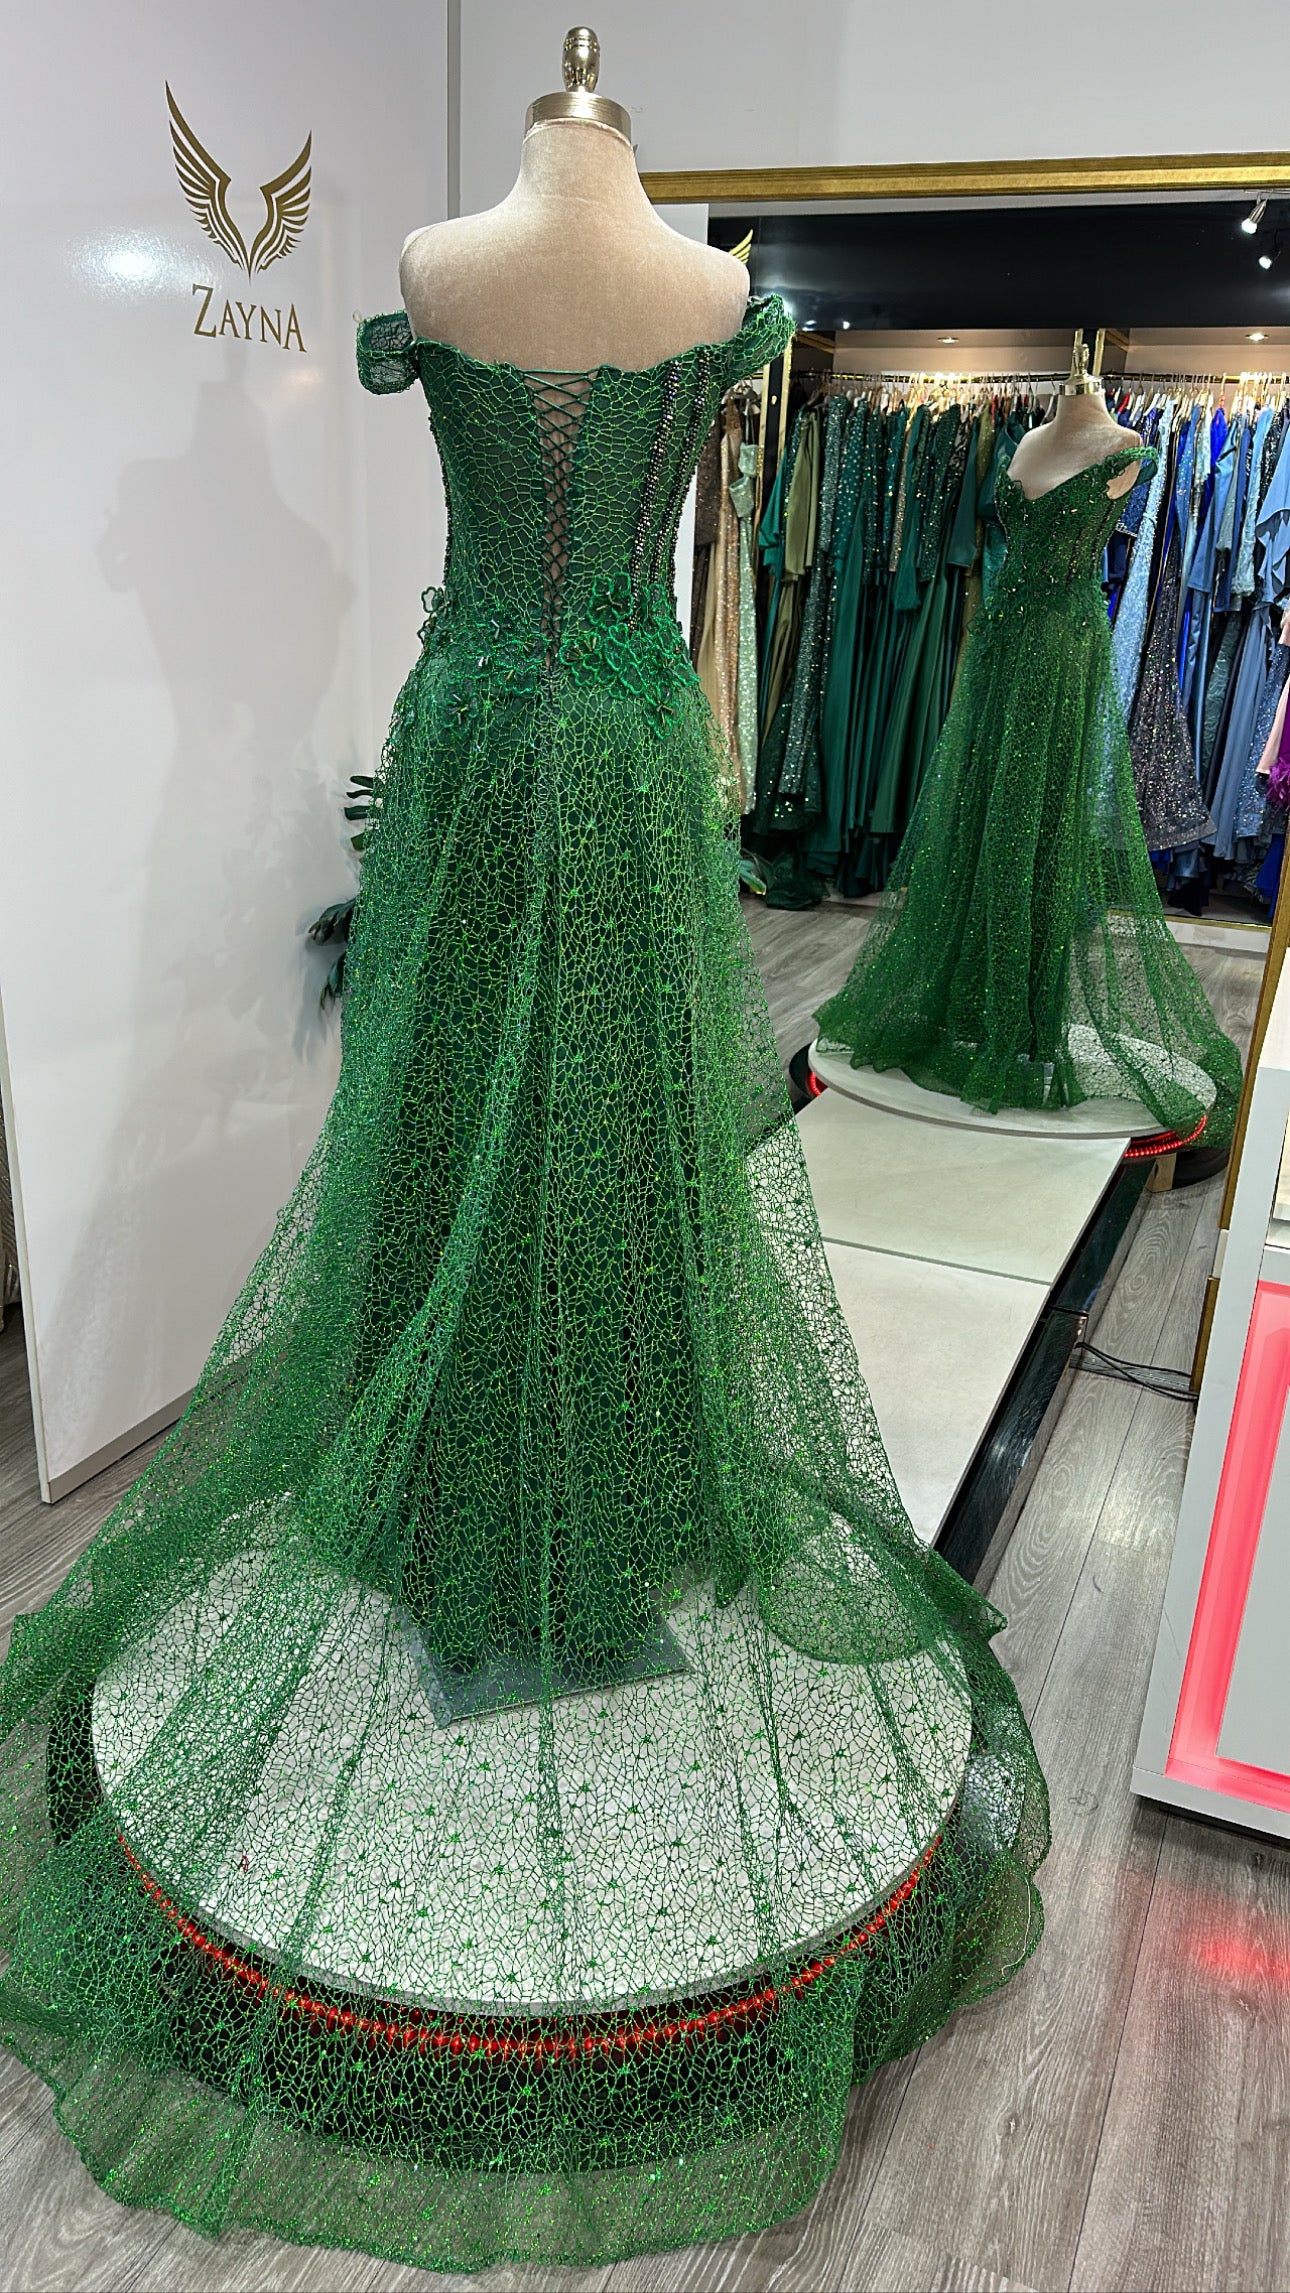 Beautiful green dress details, decorated with beads